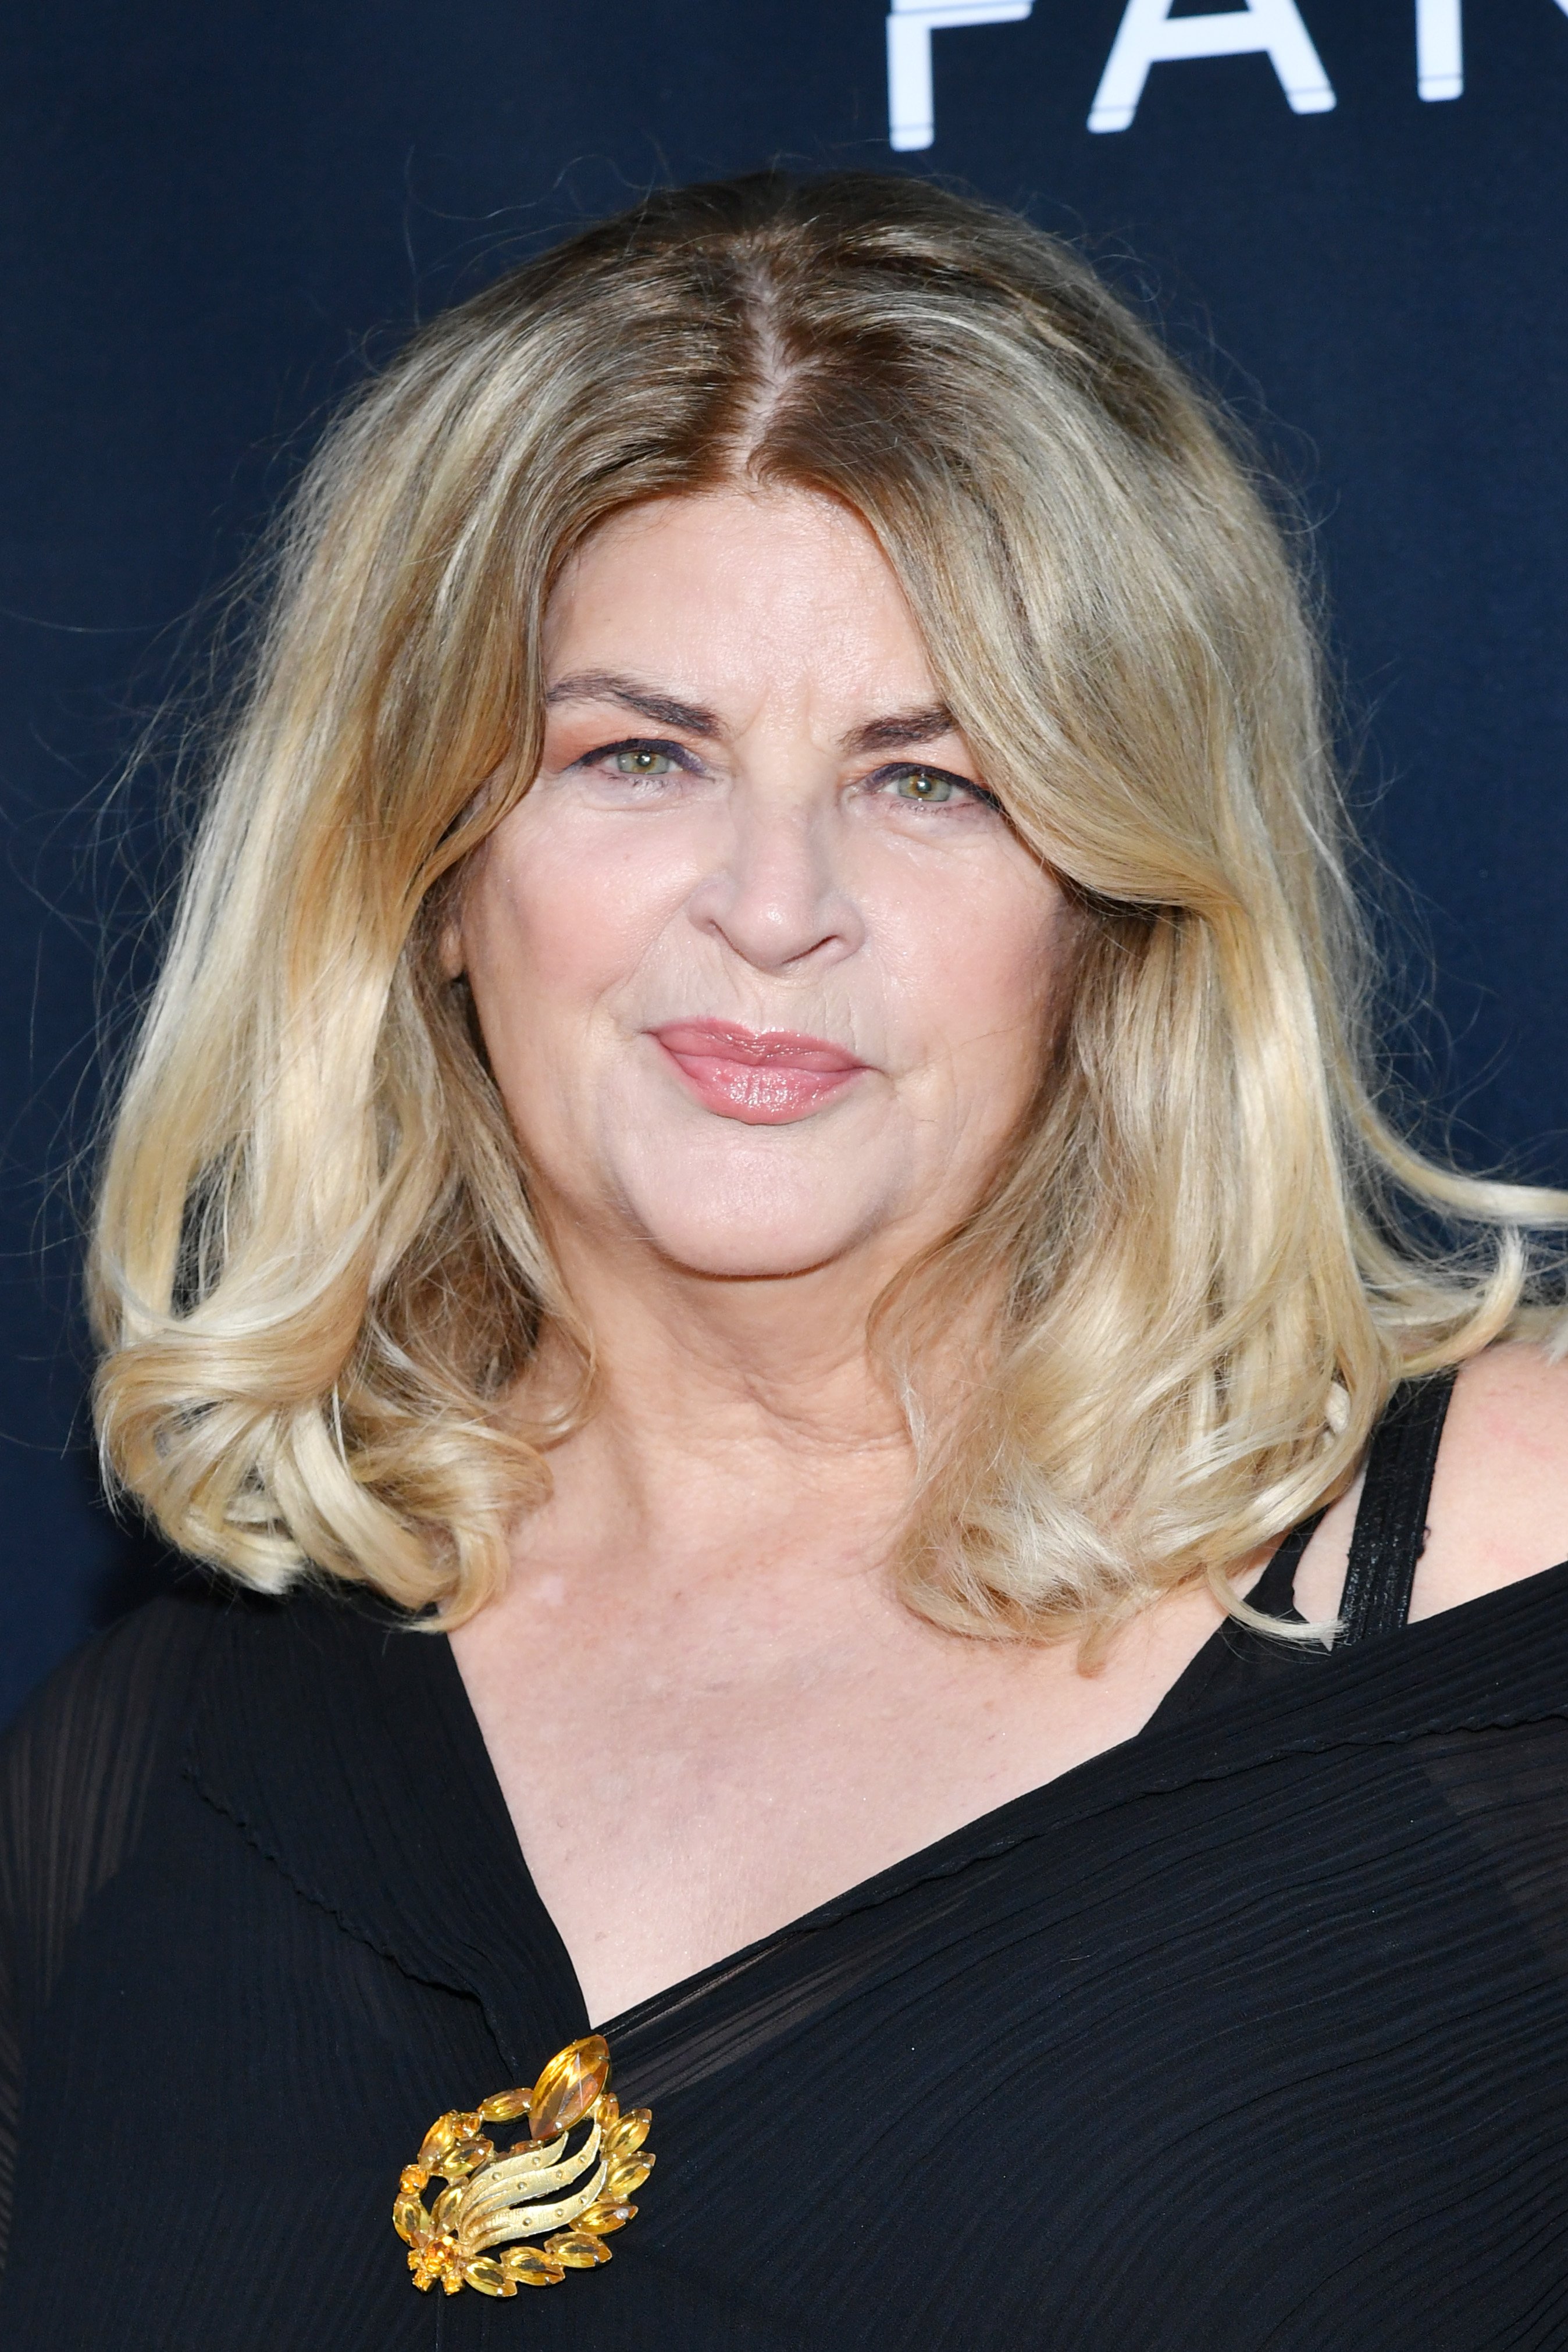 Kirstie Alley attends the premiere of Quiver Distribution's "The Fanatic" at the Egyptian Theatre on August 22, 2019 in Hollywood, California. | Source: Getty Images